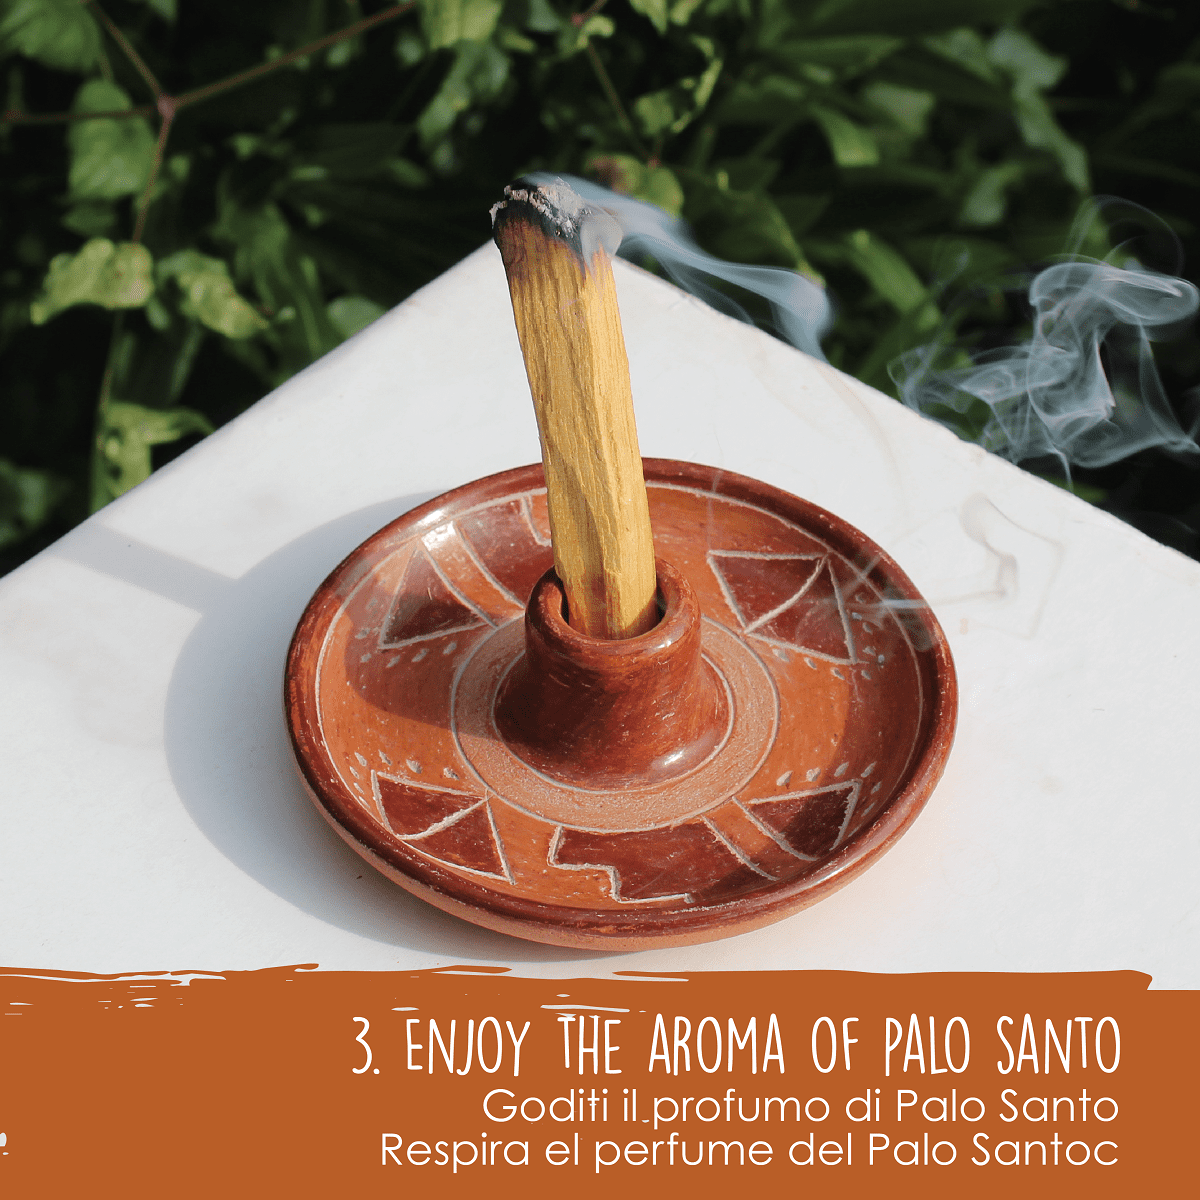 Palo Santo / Incense Holder – SIMPLE AS IS